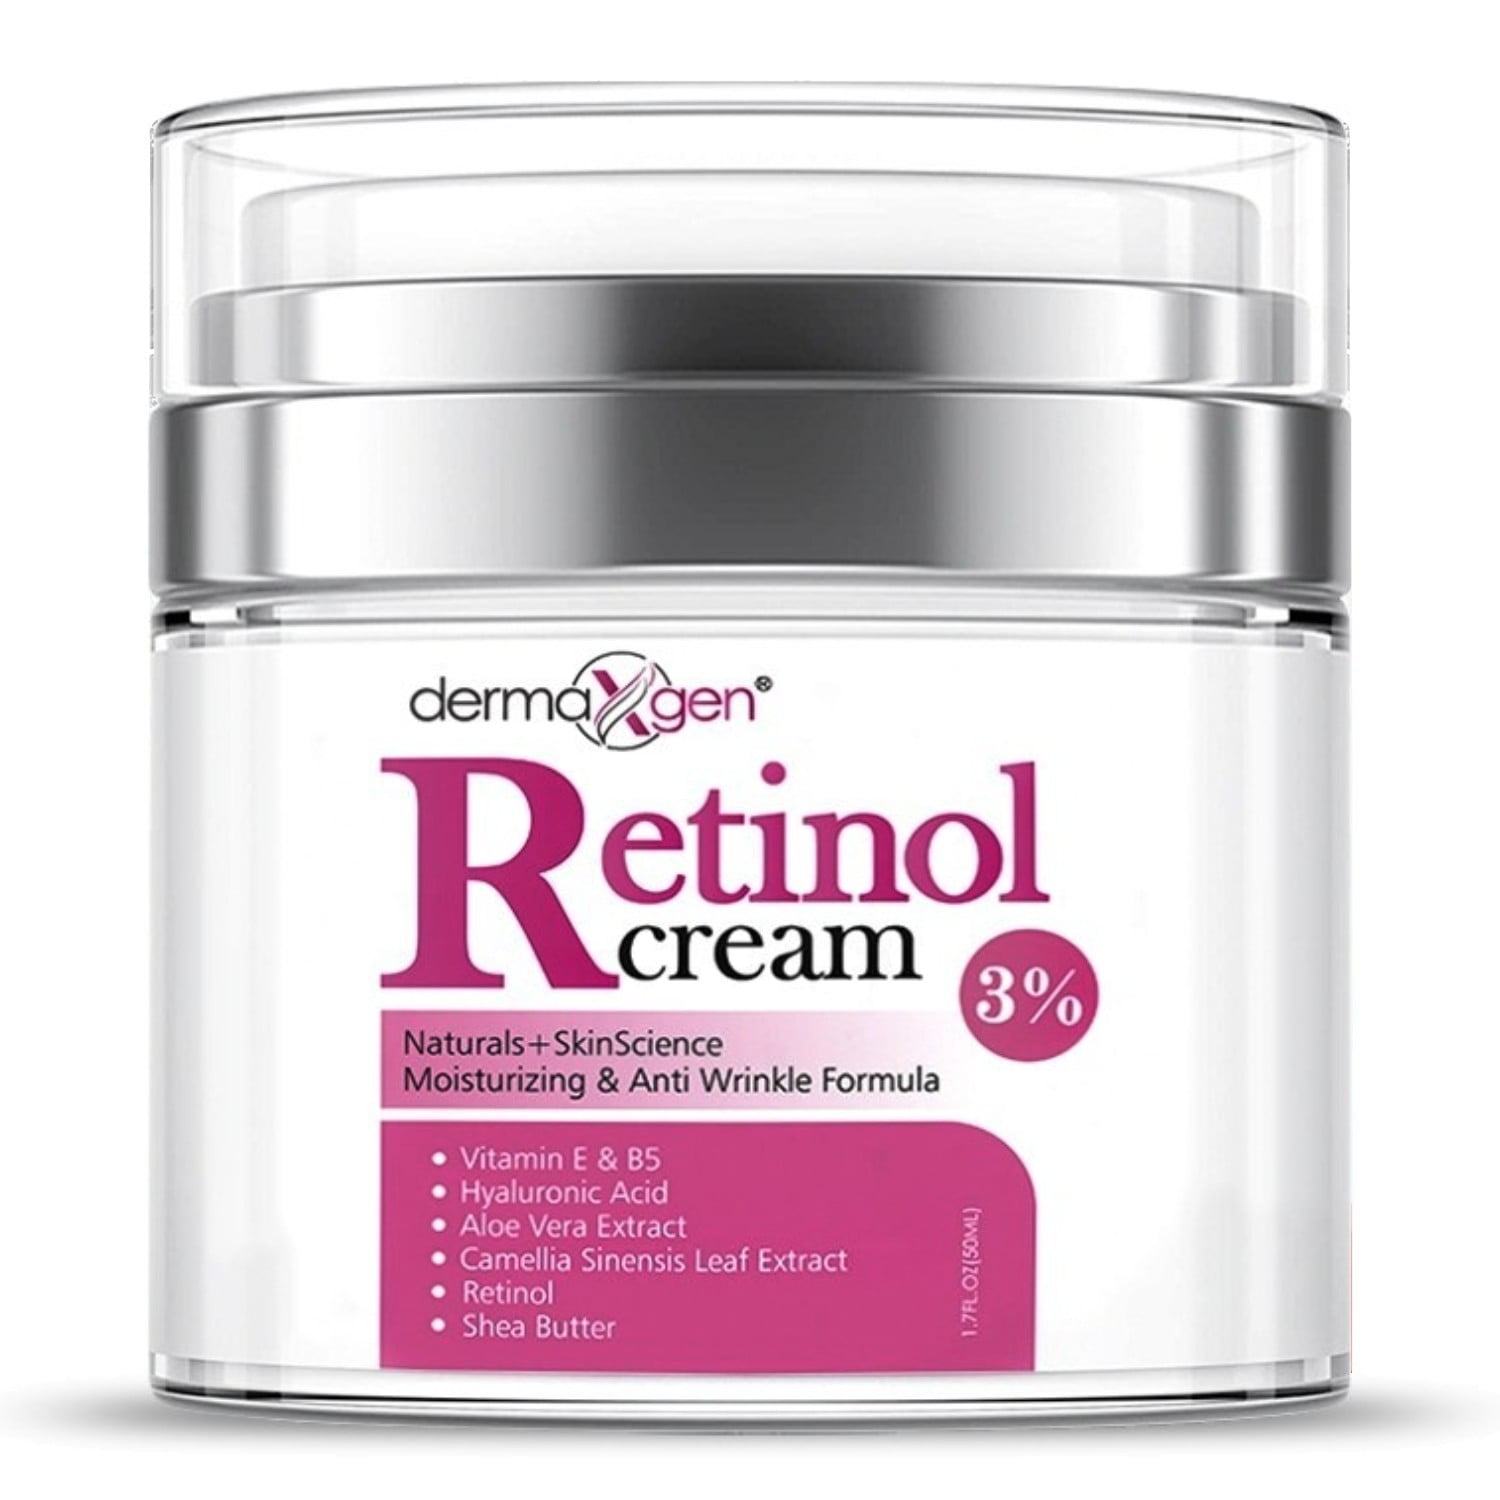 Retinol Moisturizer Cream High for Face and Eye Miracle - Retinol, Hyaluronic Acid, Vitamin E, Green Tea Anti aging Formula Reduces Wrinkles, Fine Lines, Spots-Day and Night -